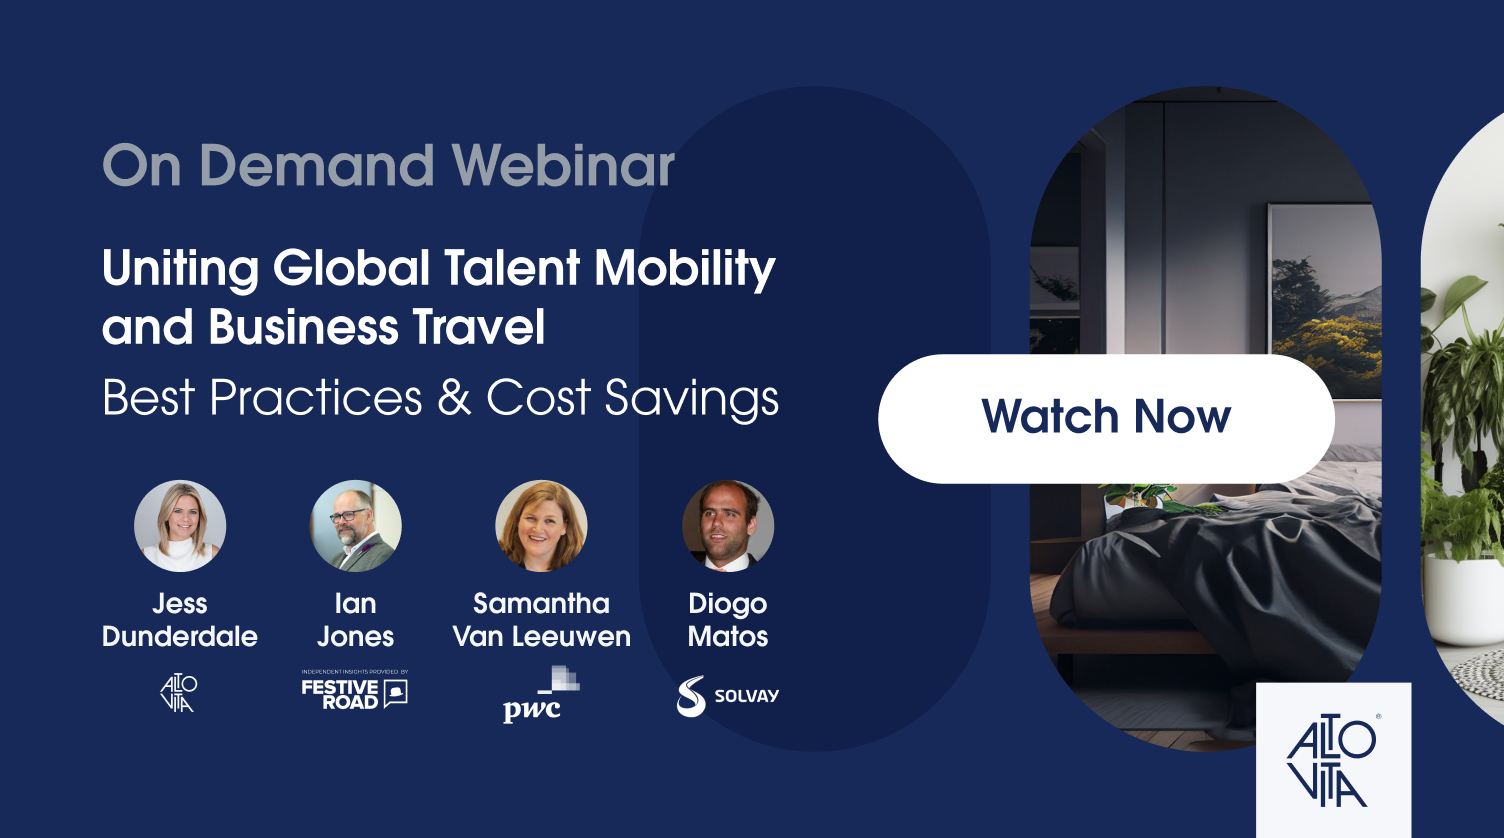 On Demand: Uniting Global Talent Mobility and Business Travel: Best Practices & Cost Savings